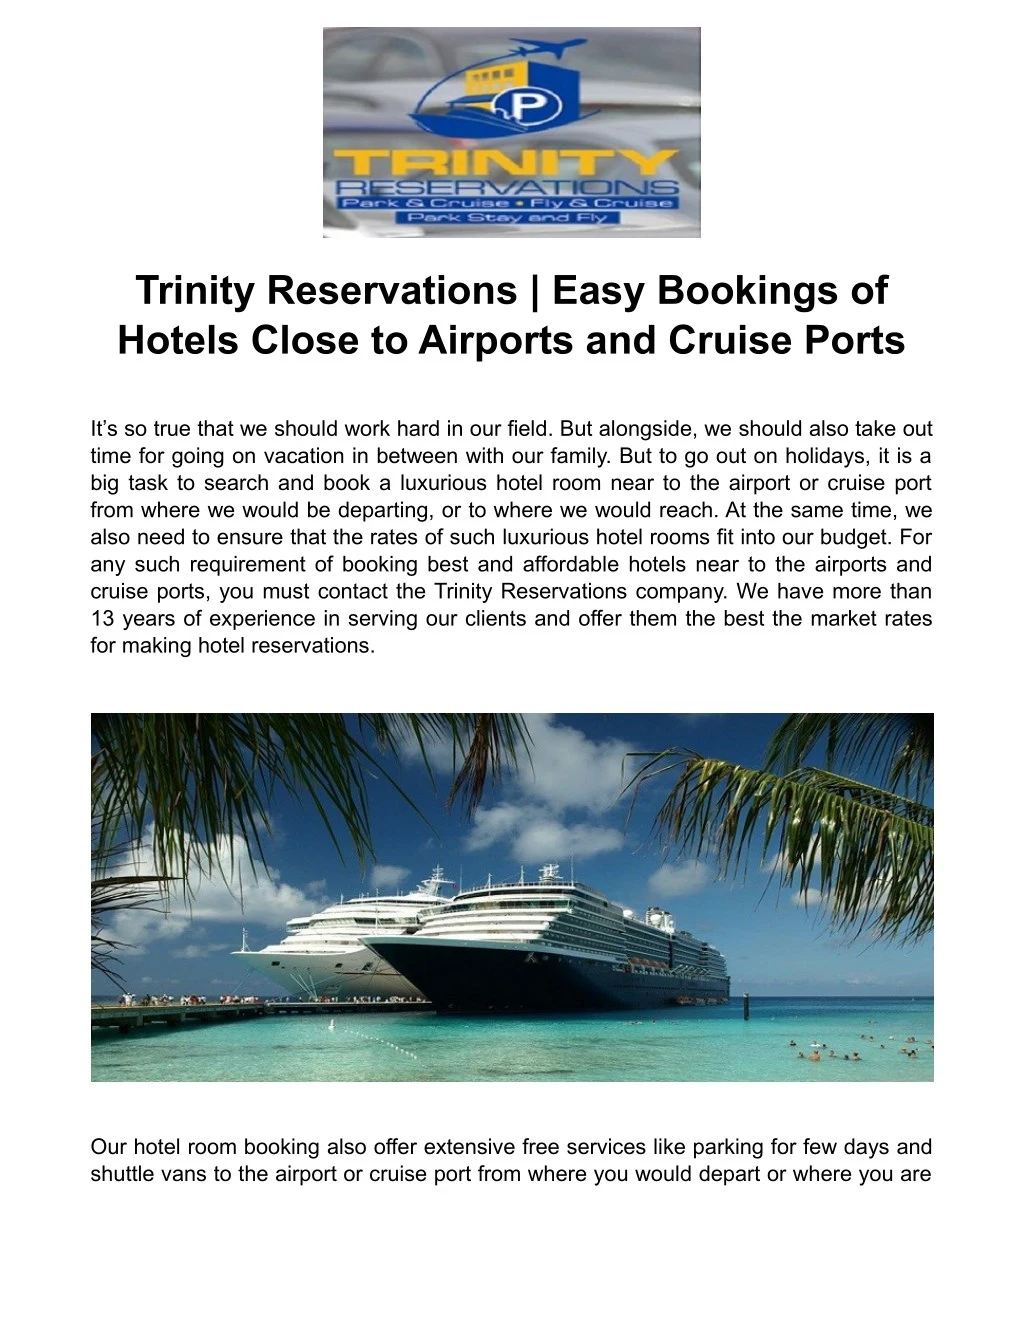 trinity reservations easy bookings of hotels